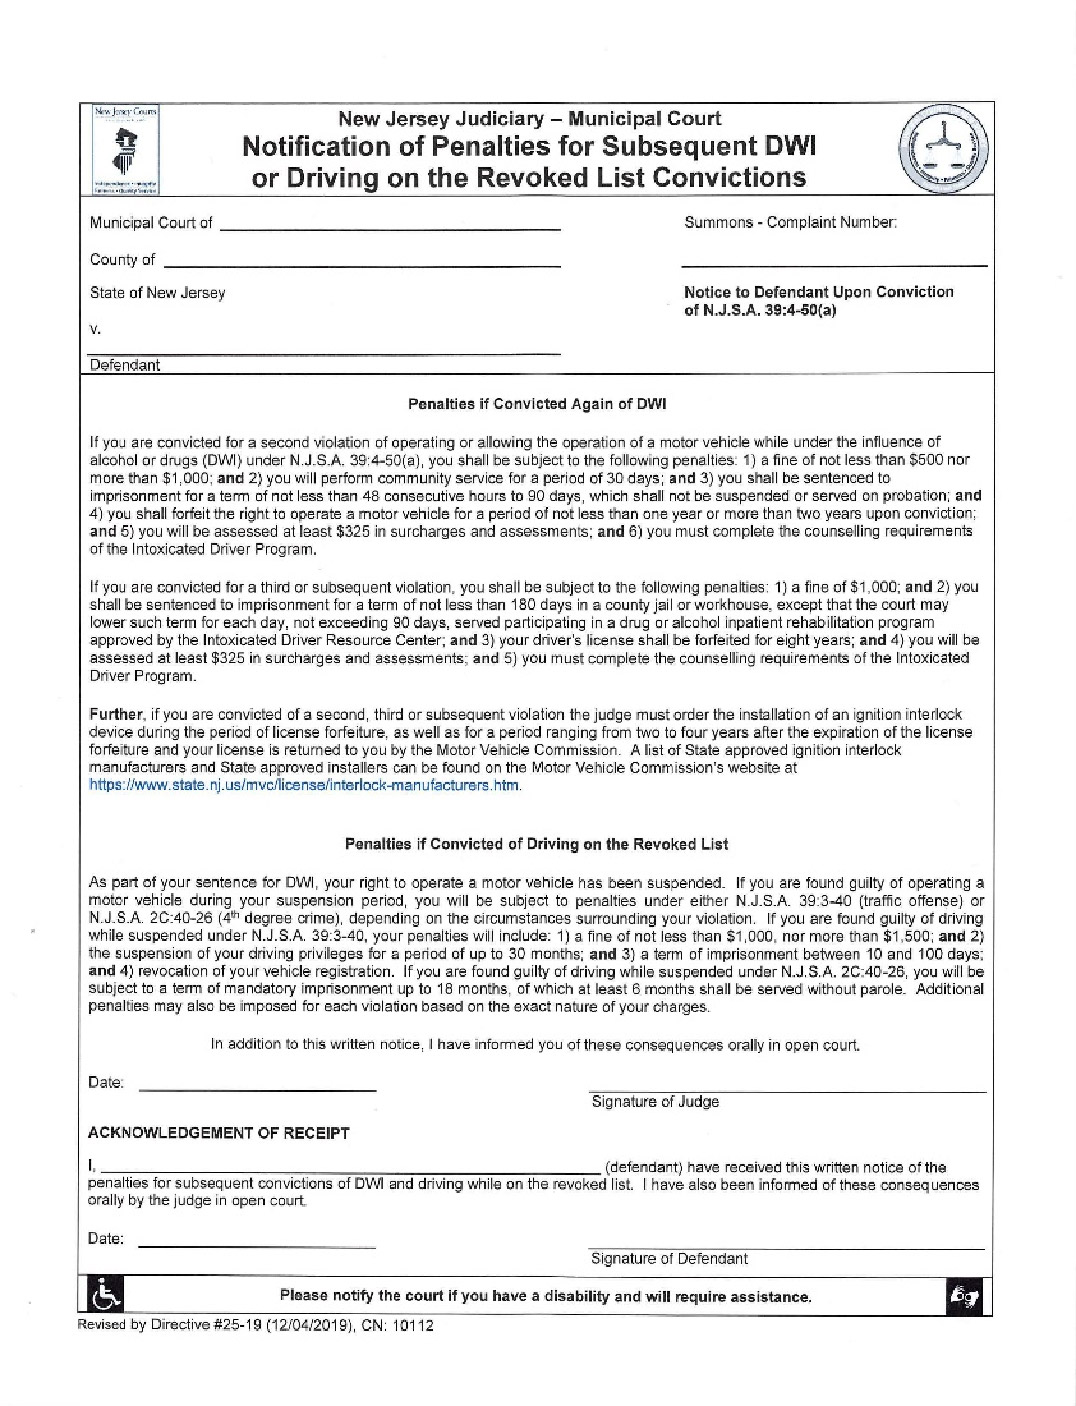 Notification of Enhanced Penalties for Subsequent DWI or Driving on the Revoked List Convictions Form